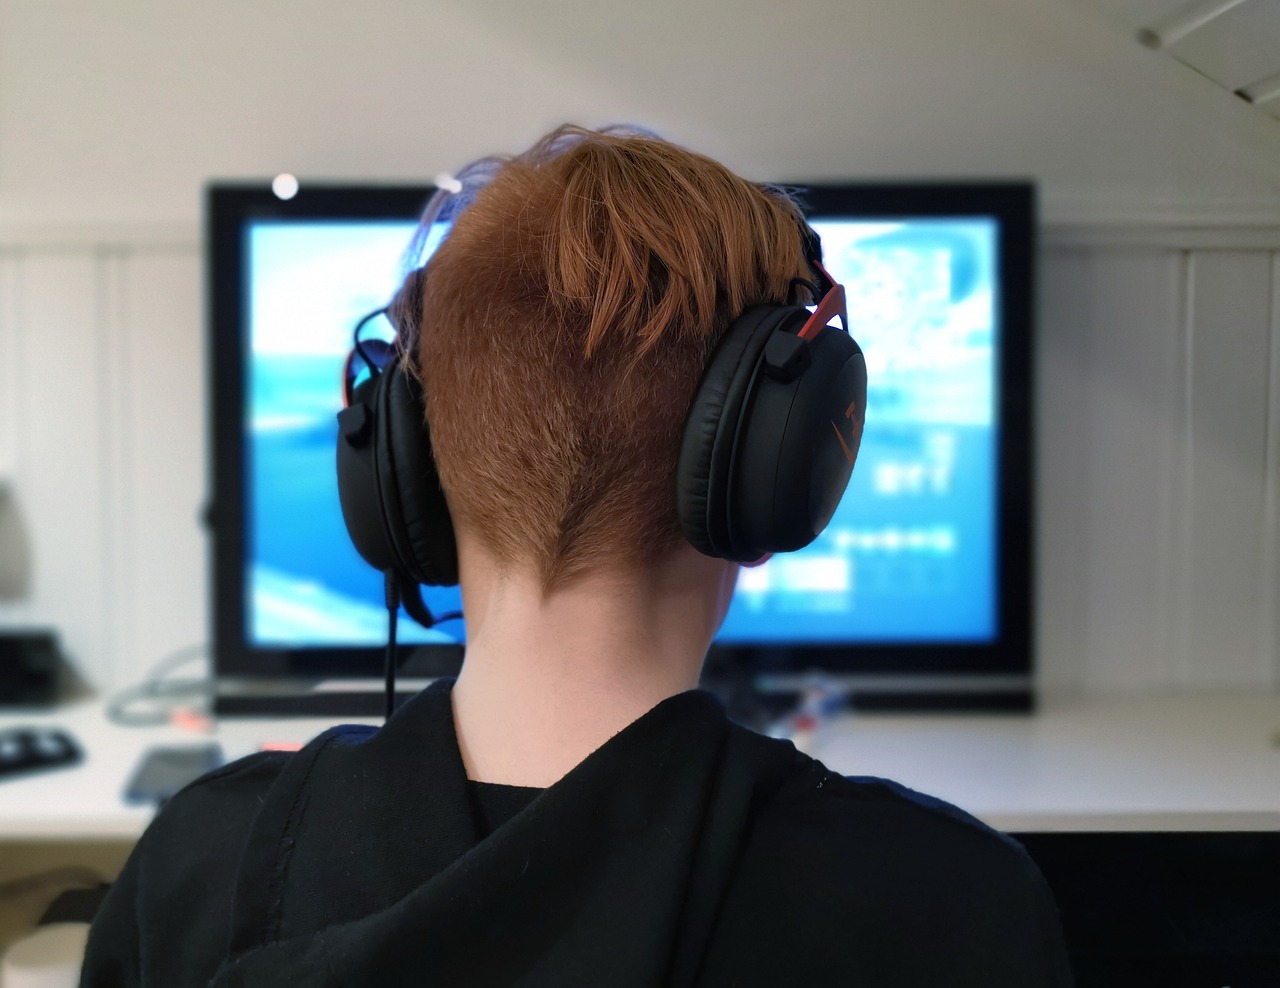 9 Things That Every Gamer Should Have For Seamless Online Gaming